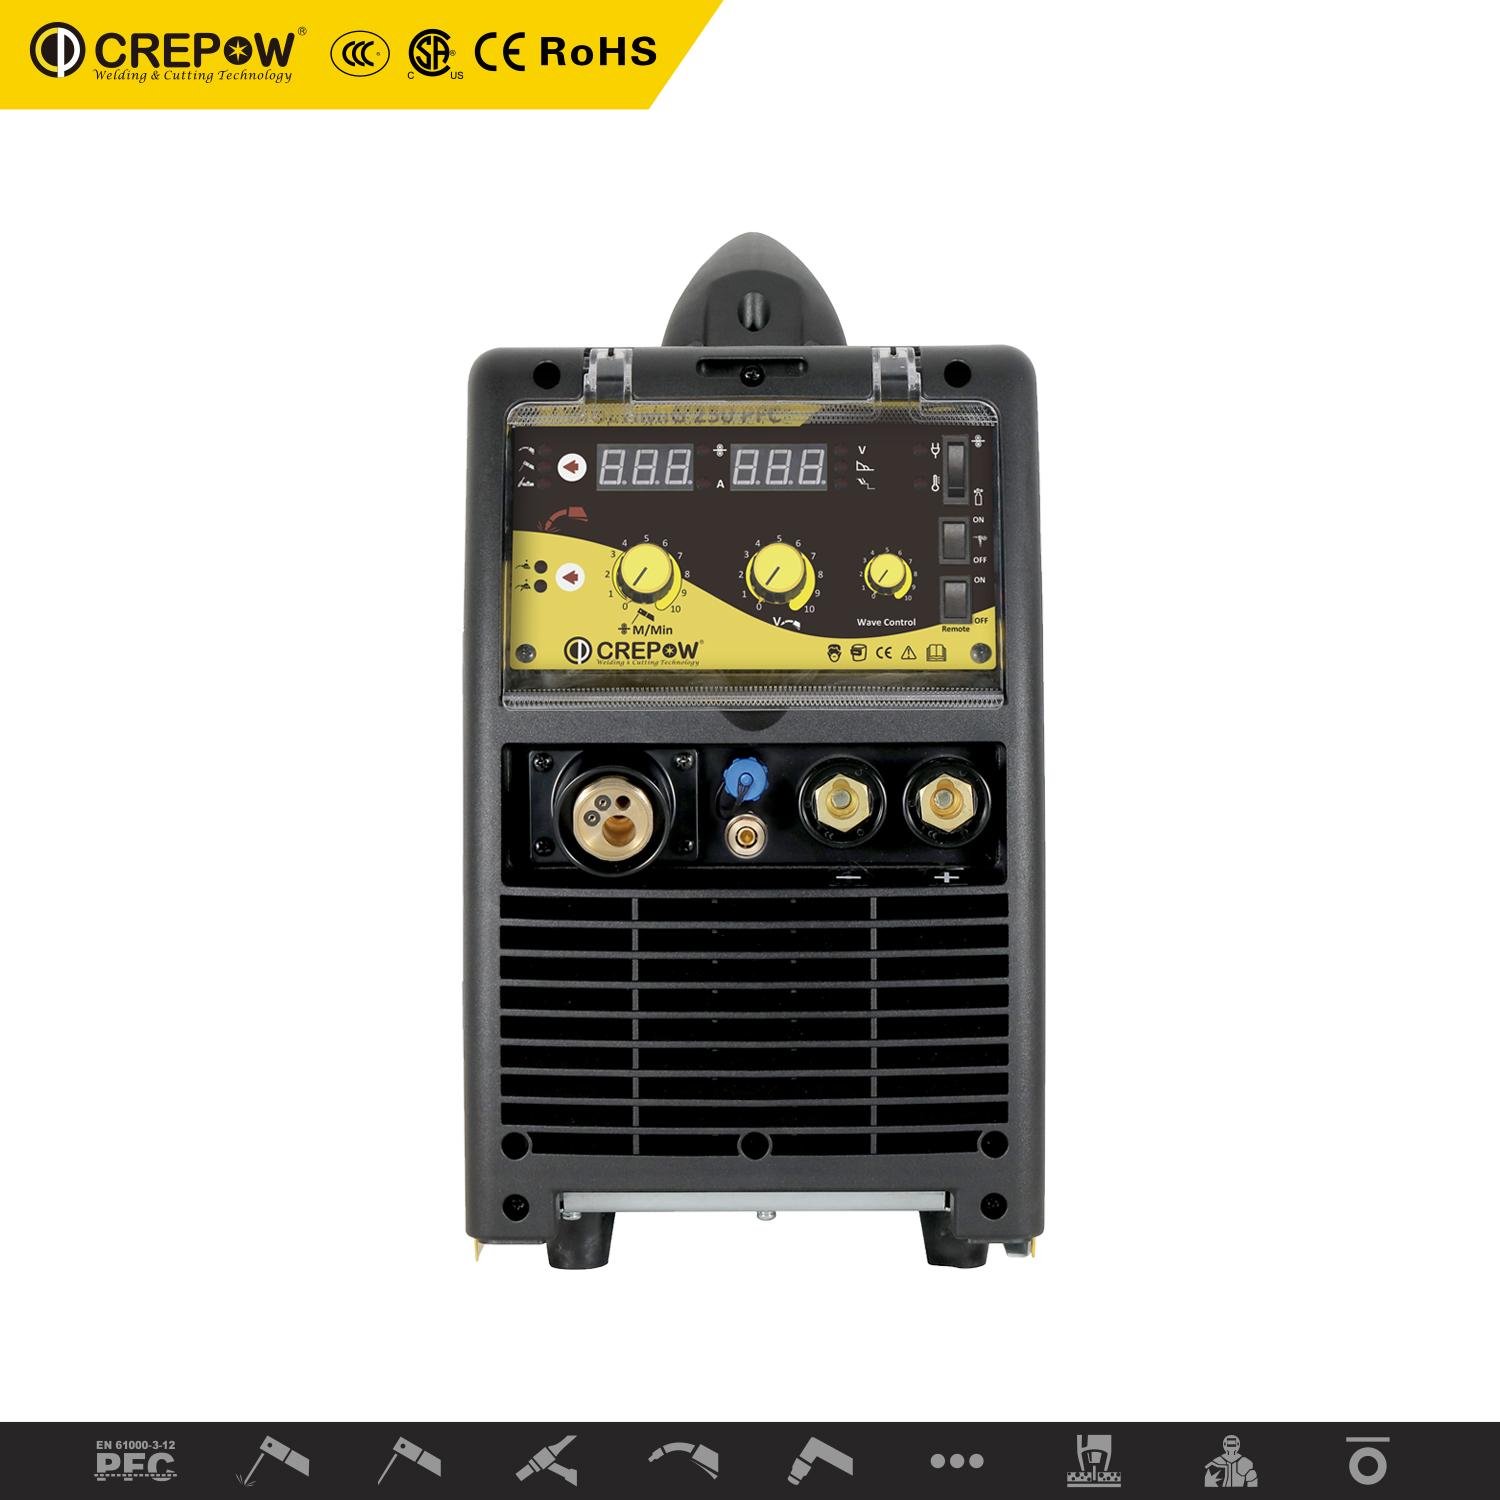 Crepow MULTIMIG250 PFC Inverter Multi Function MIG/STICK/LIFT TIG with PFC 3